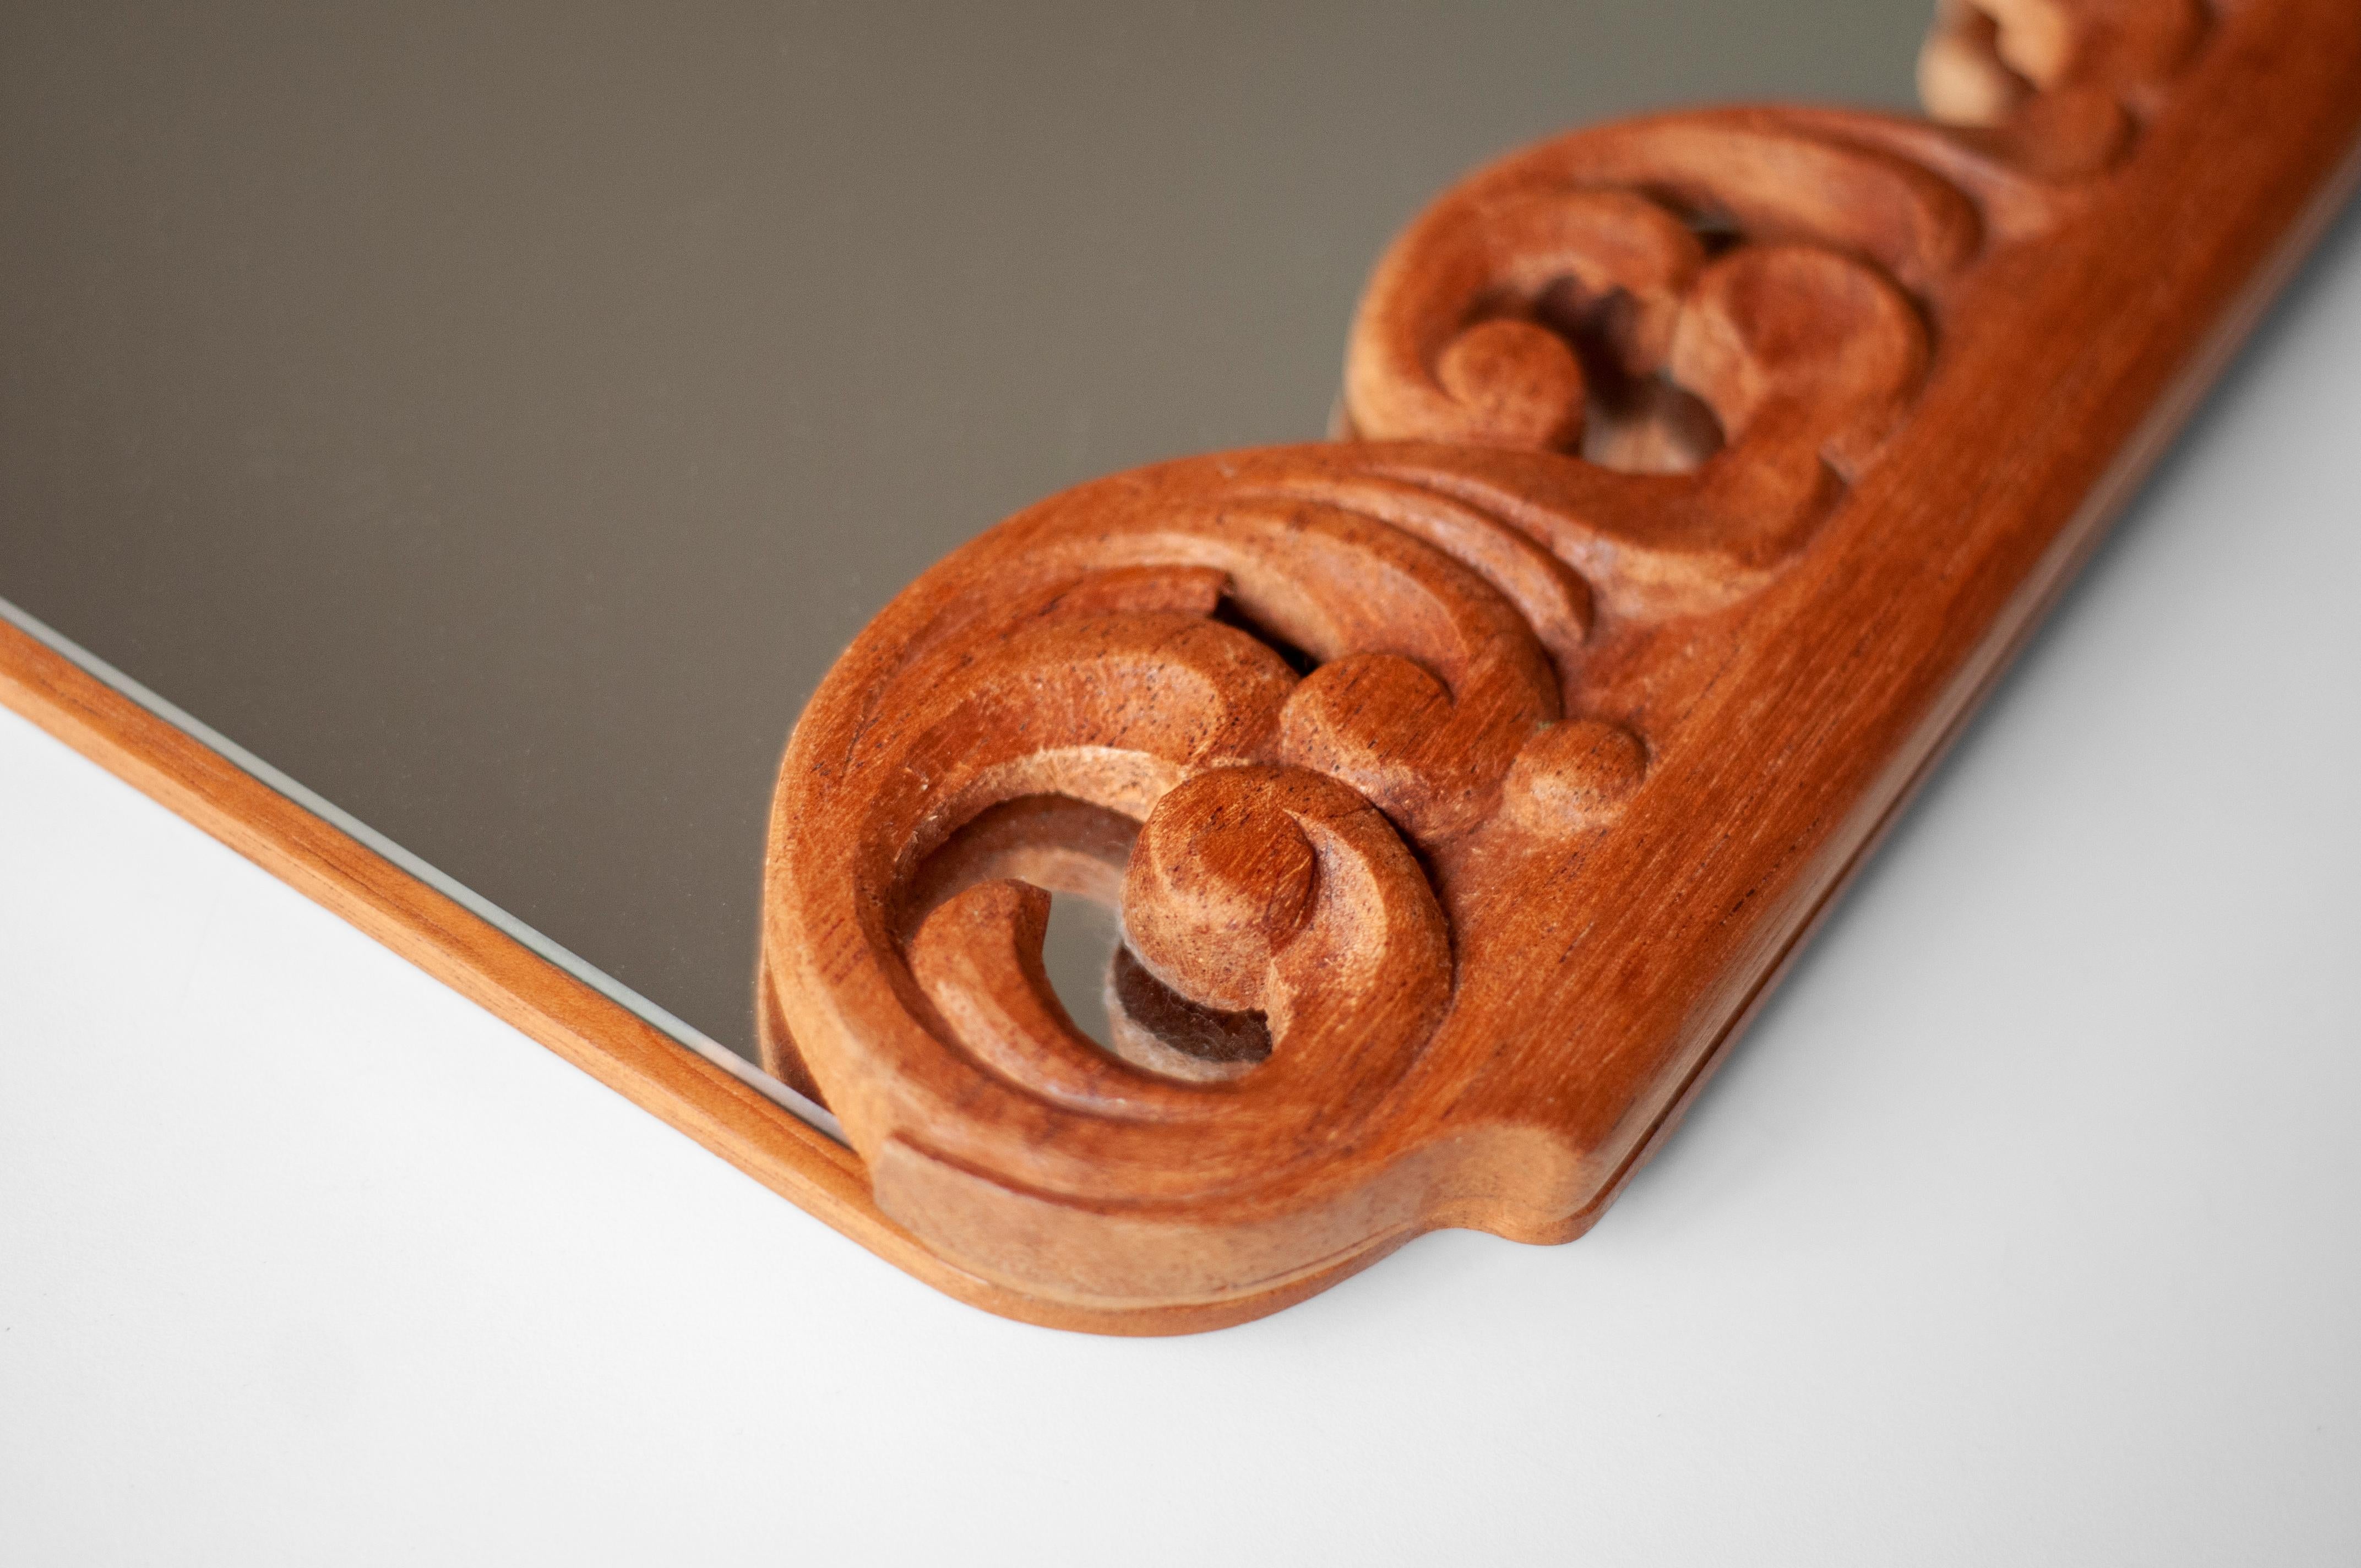 This tray is made in solid pink cedar wood hand carved by the craftsman Rondinelly Santos, specialized in sacred art, in Minas Gerais, Brazil

The flowing design of the acanthus scrolls and leaves comes creates a depth effect, playng with